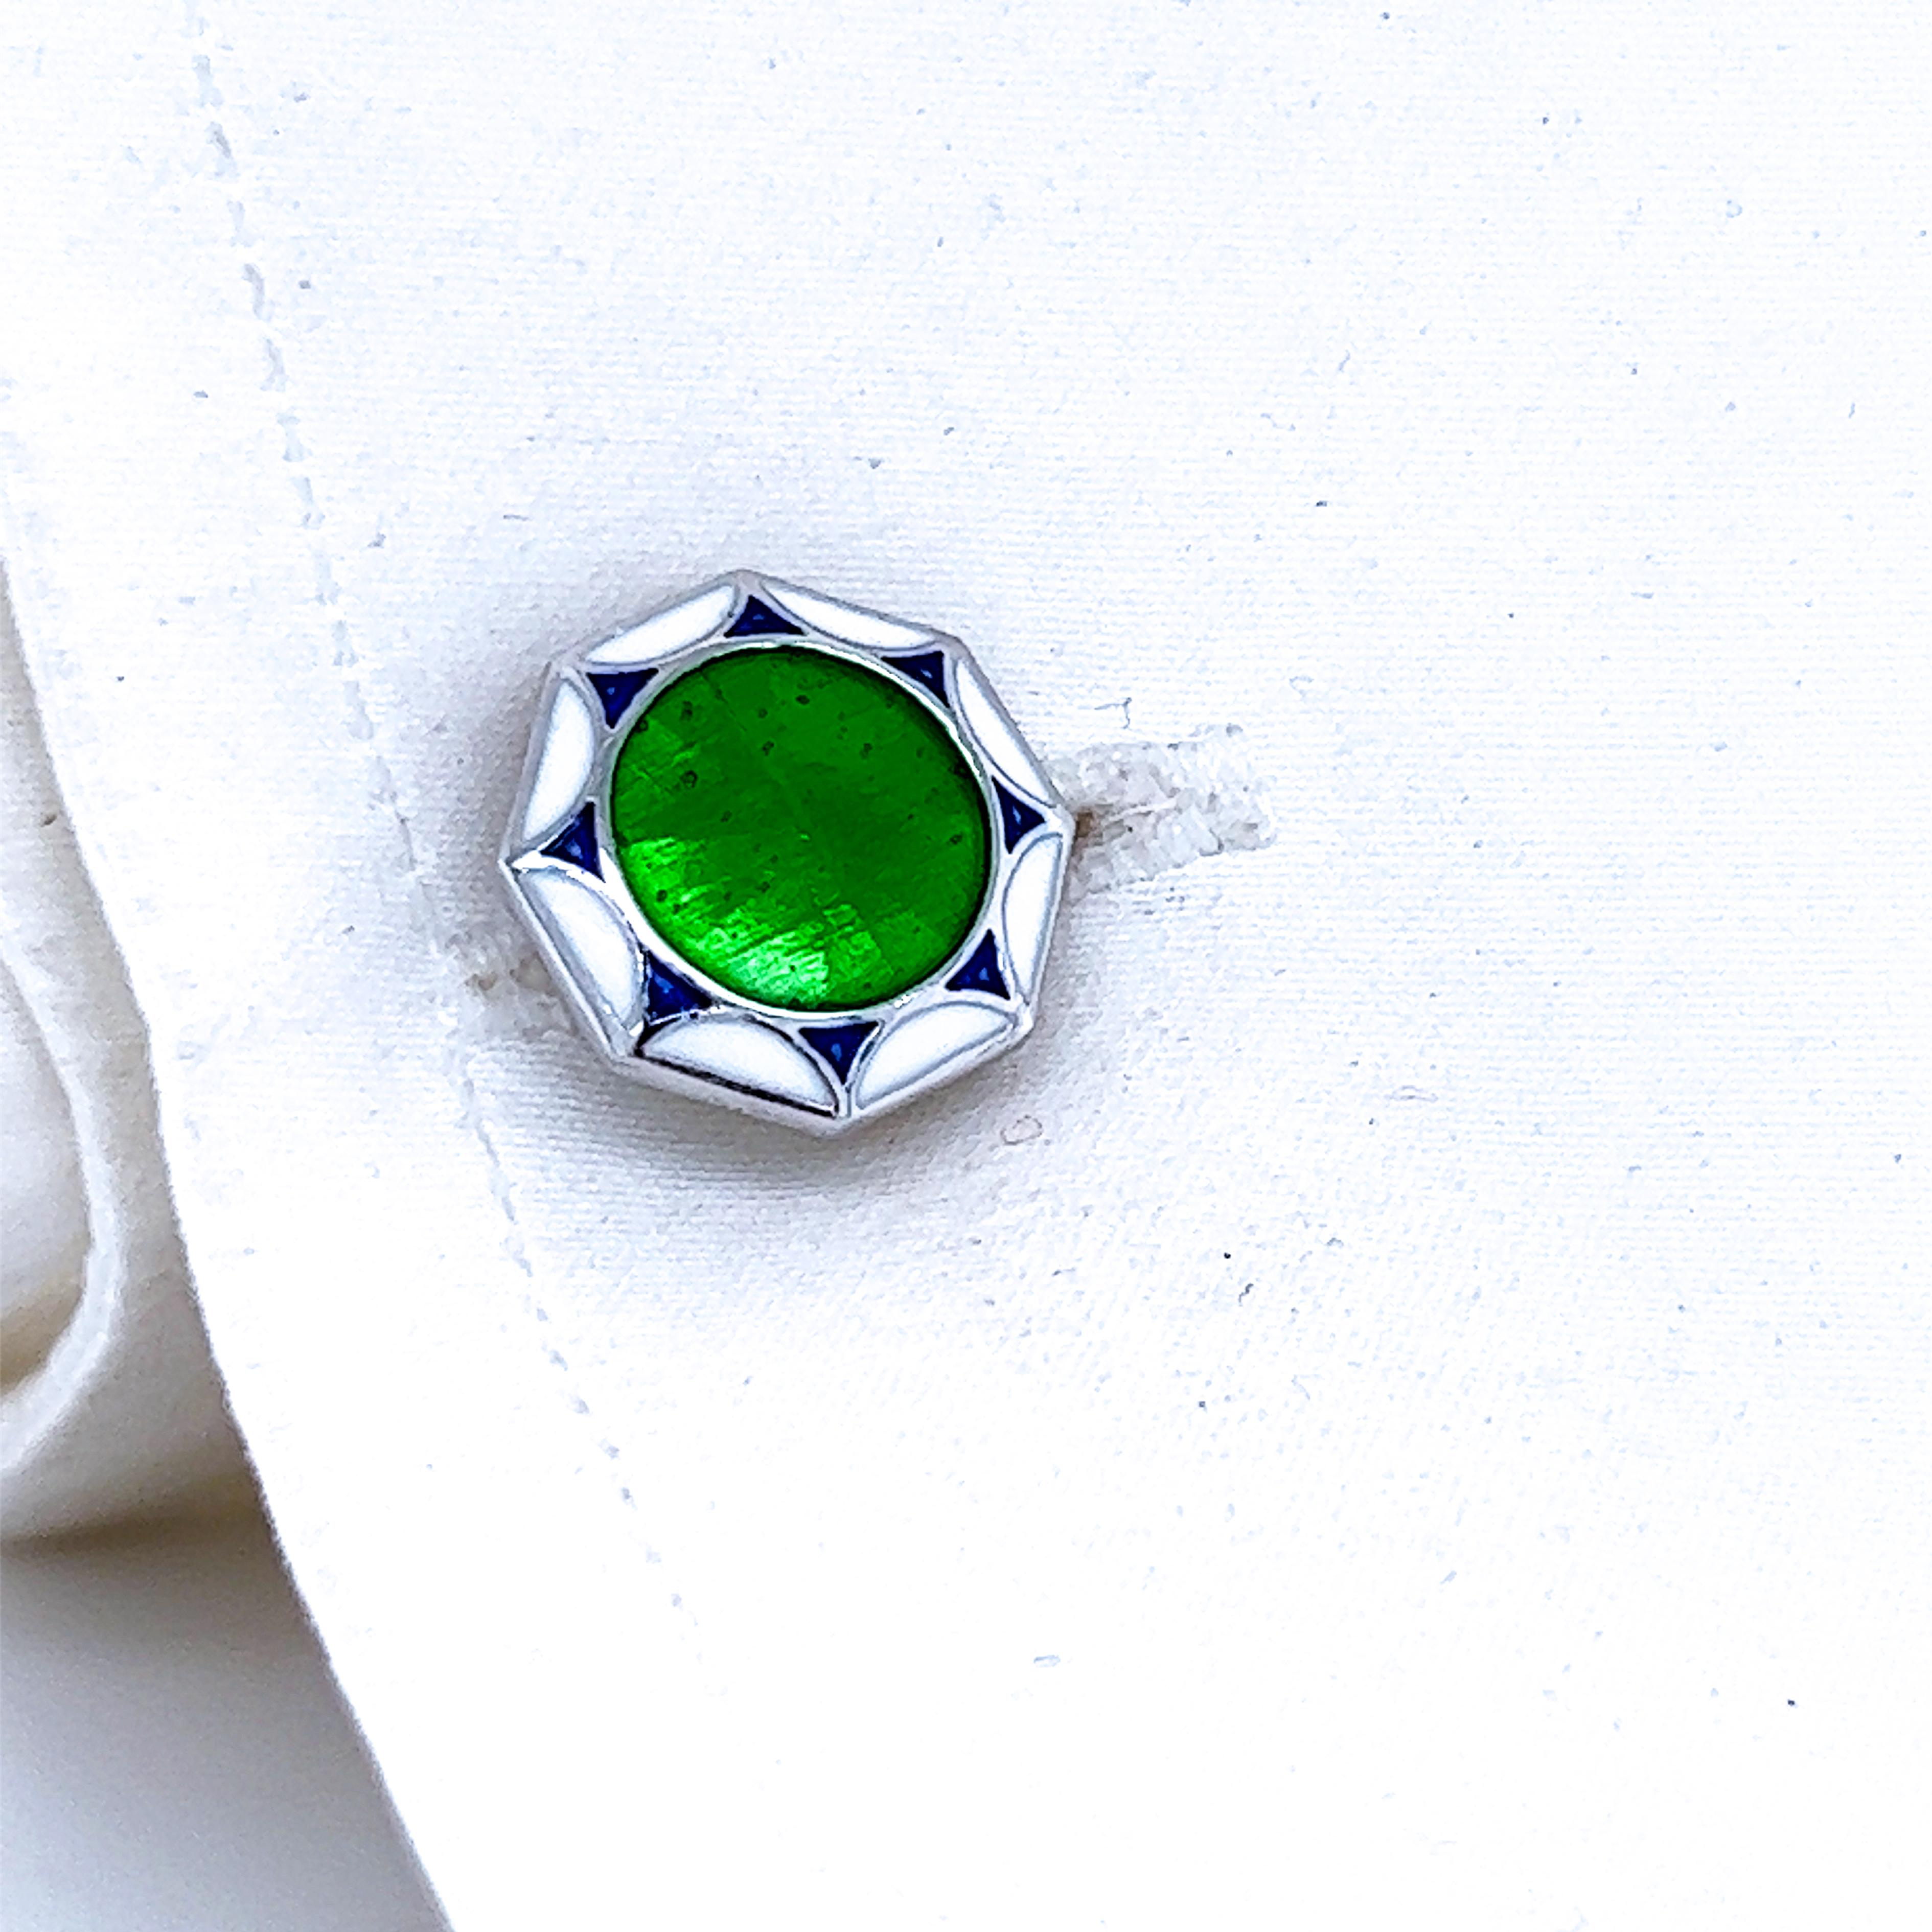 Berca Octagonal White Blue Green Enameled Sterling Silver Cufflinks T-Bar Back In New Condition For Sale In Valenza, IT